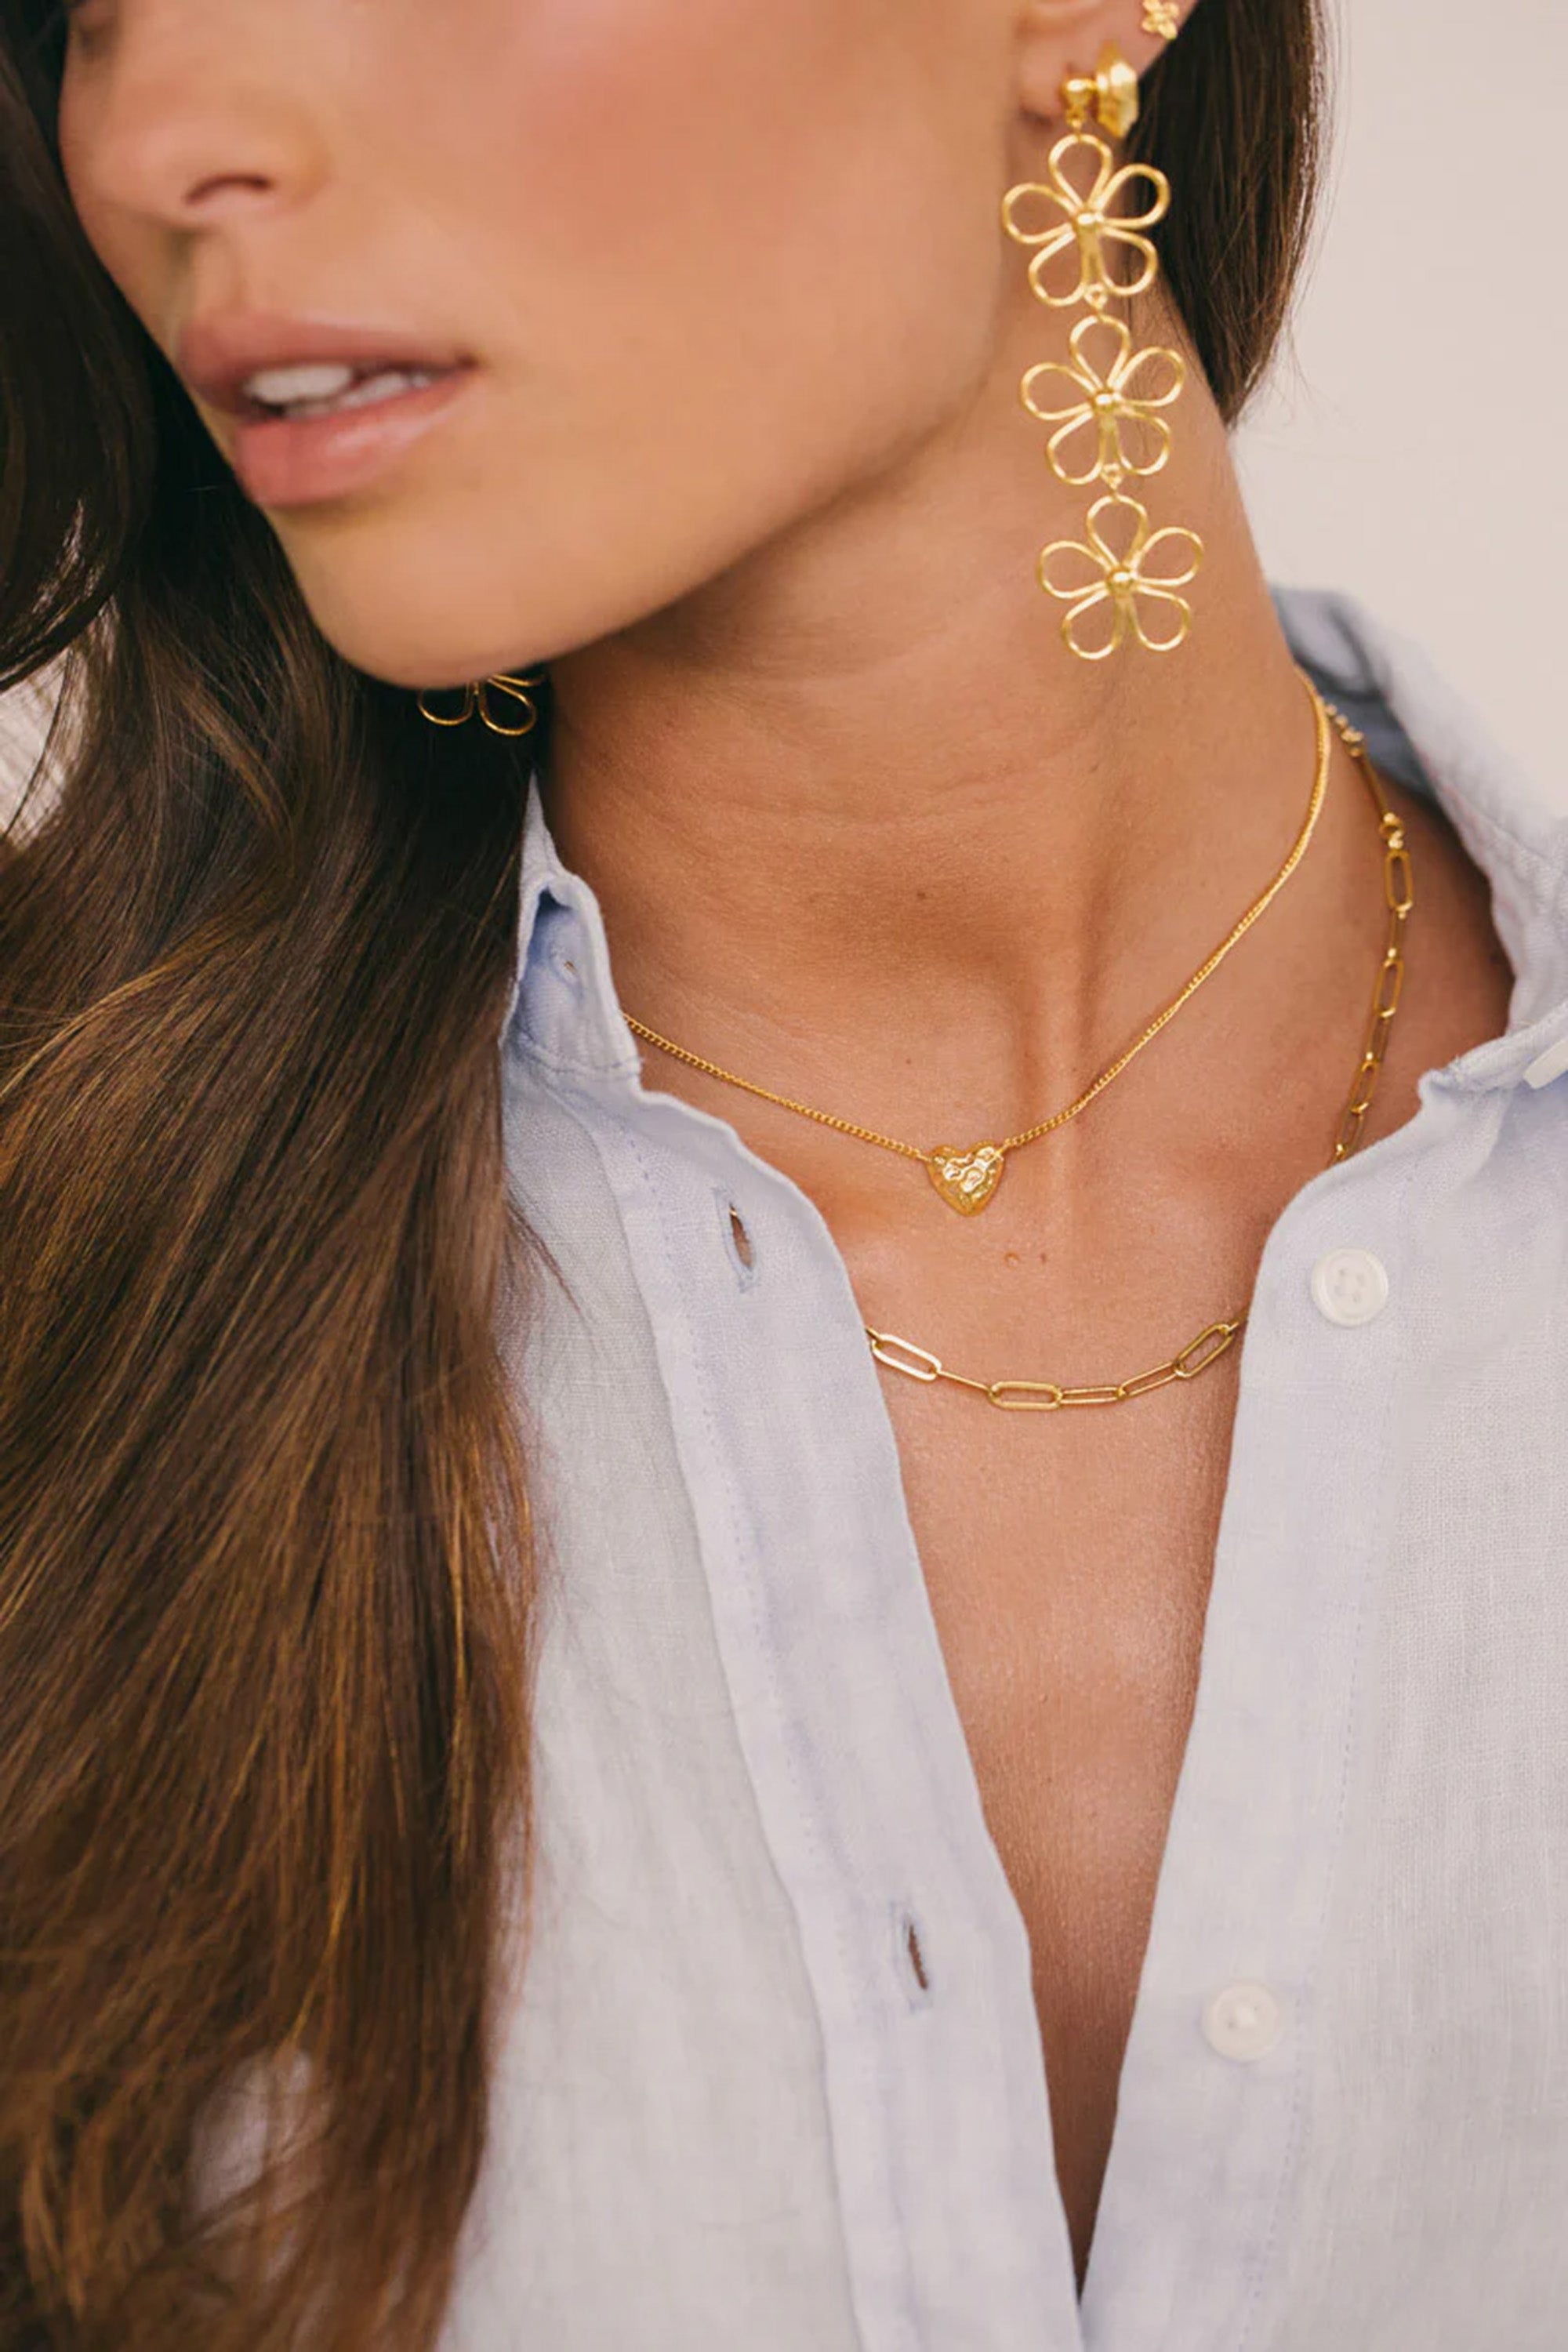 Love Necklace Gold